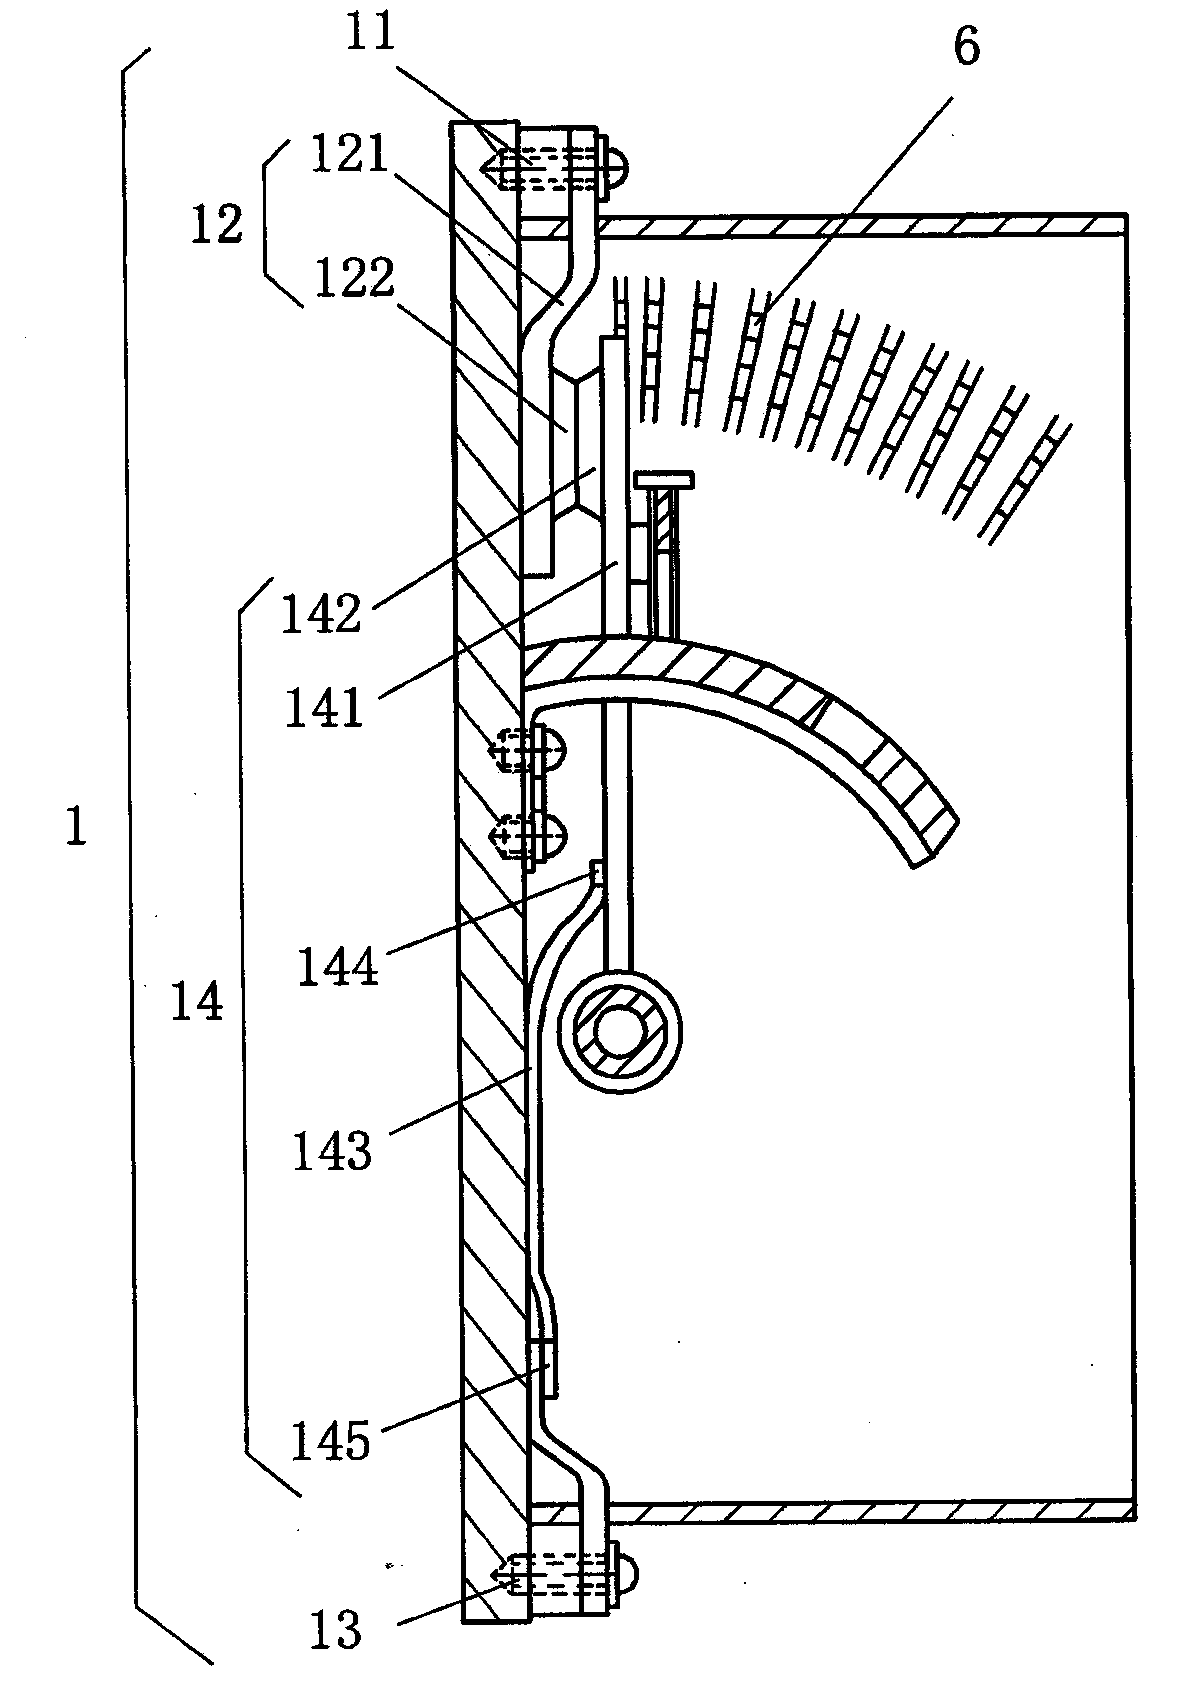 Sliding-type switching device used for main-connection-line short circuit precheck of low-voltage circuit breaker